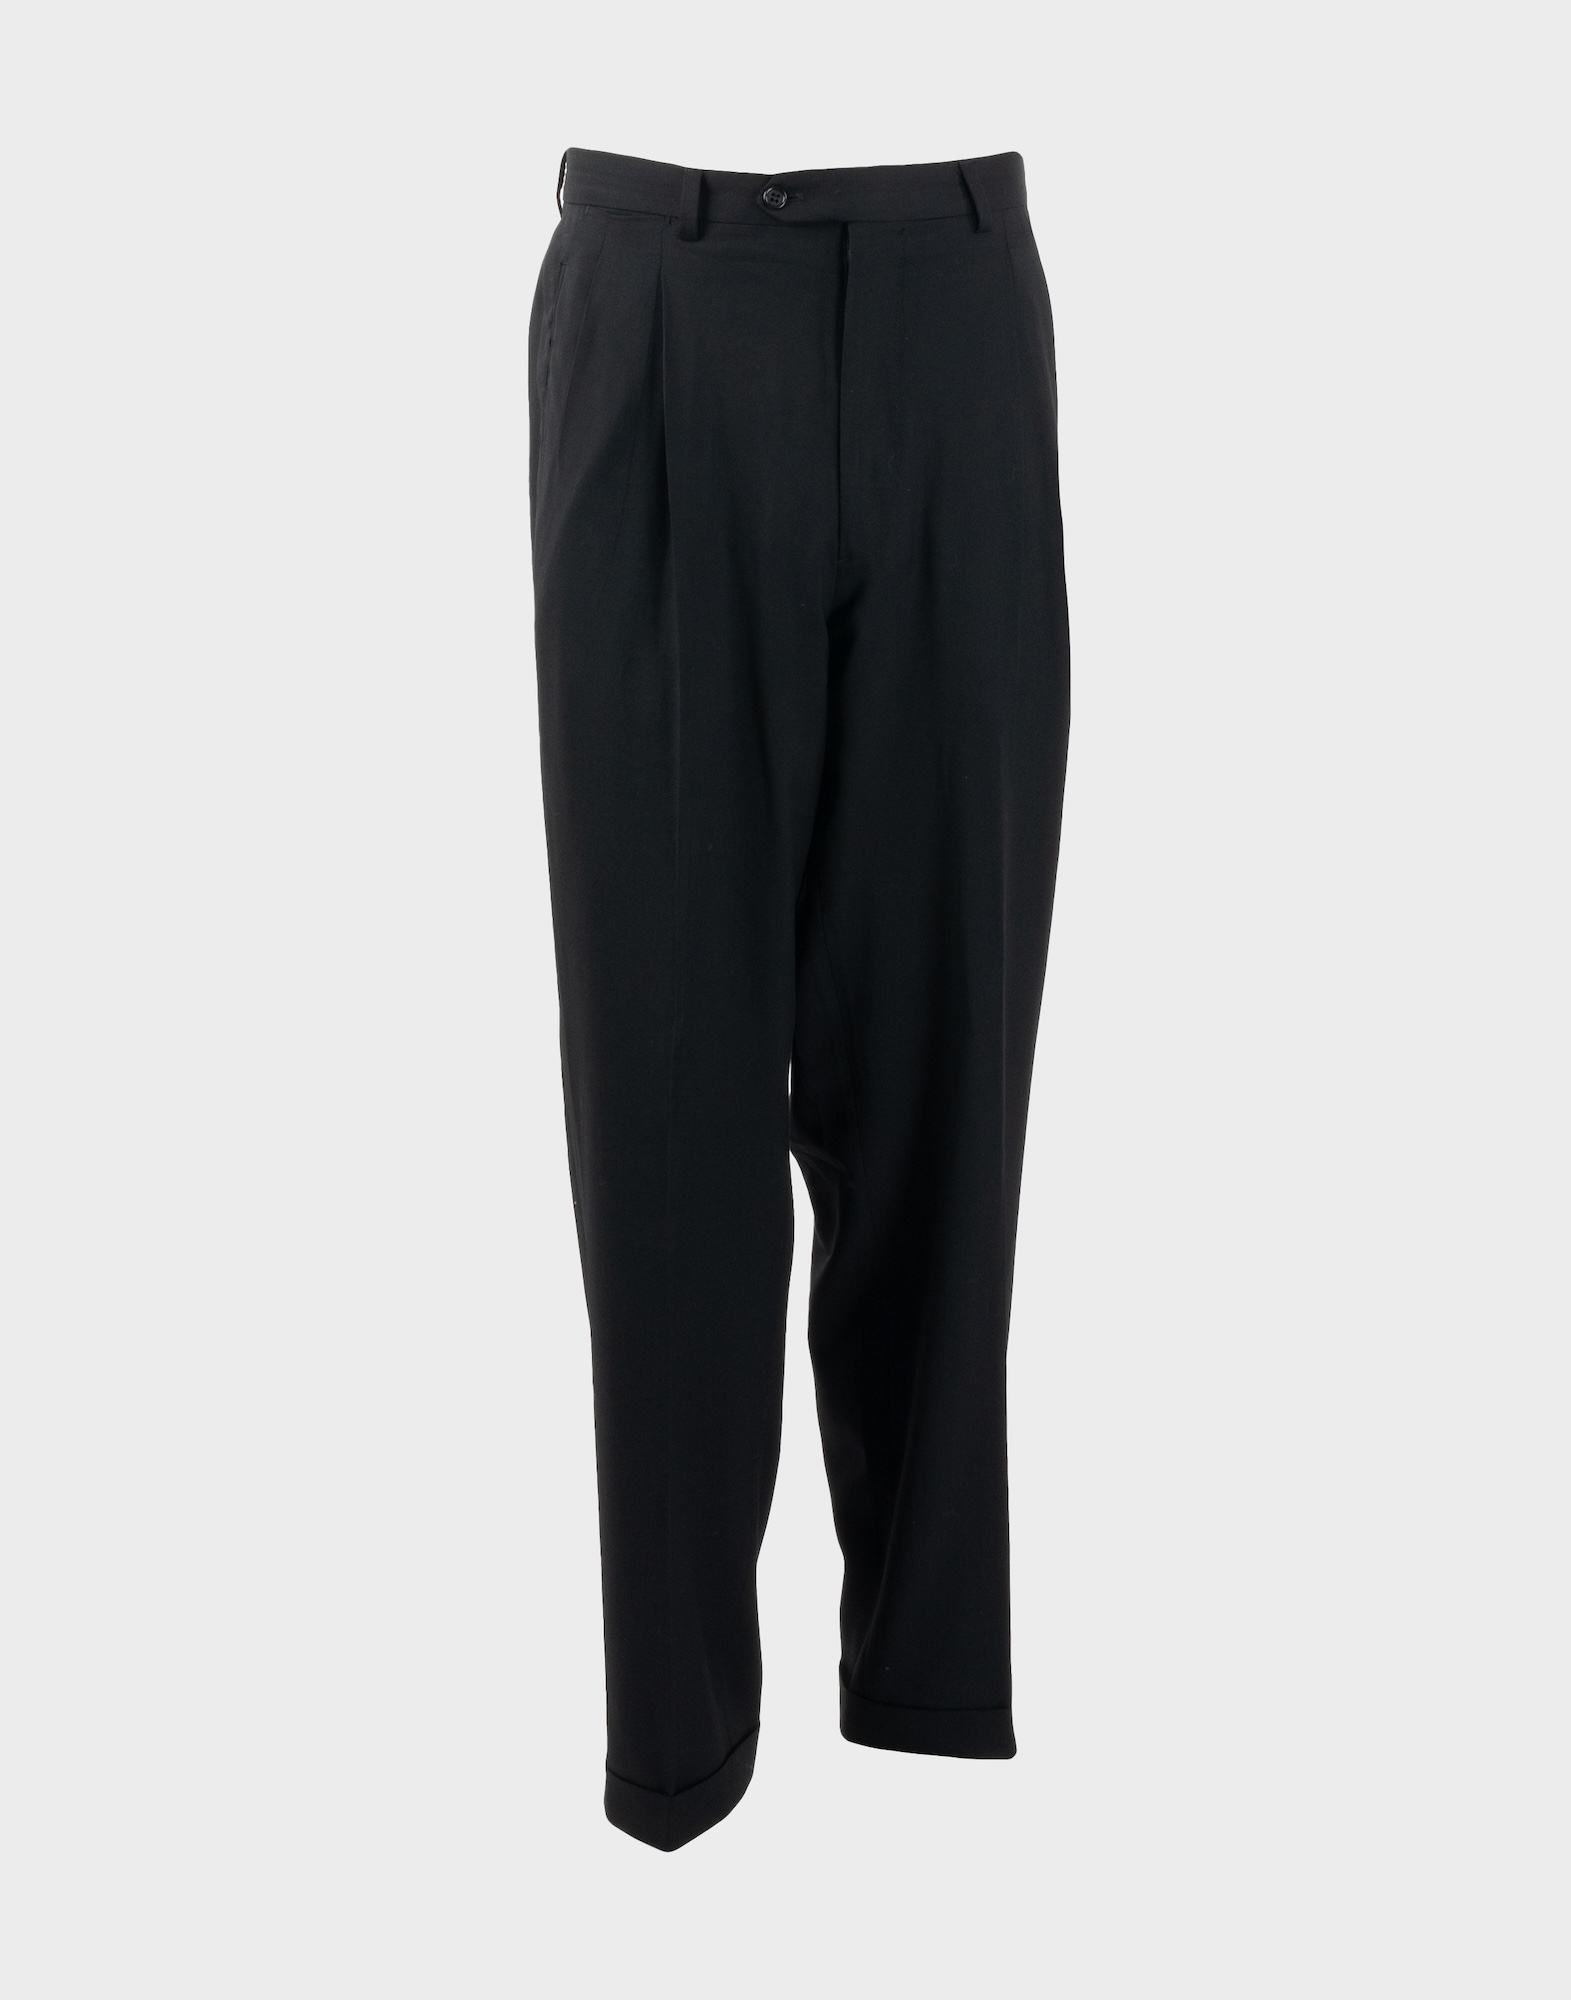 classic black men's trousers with front pleats, hook and button fastening